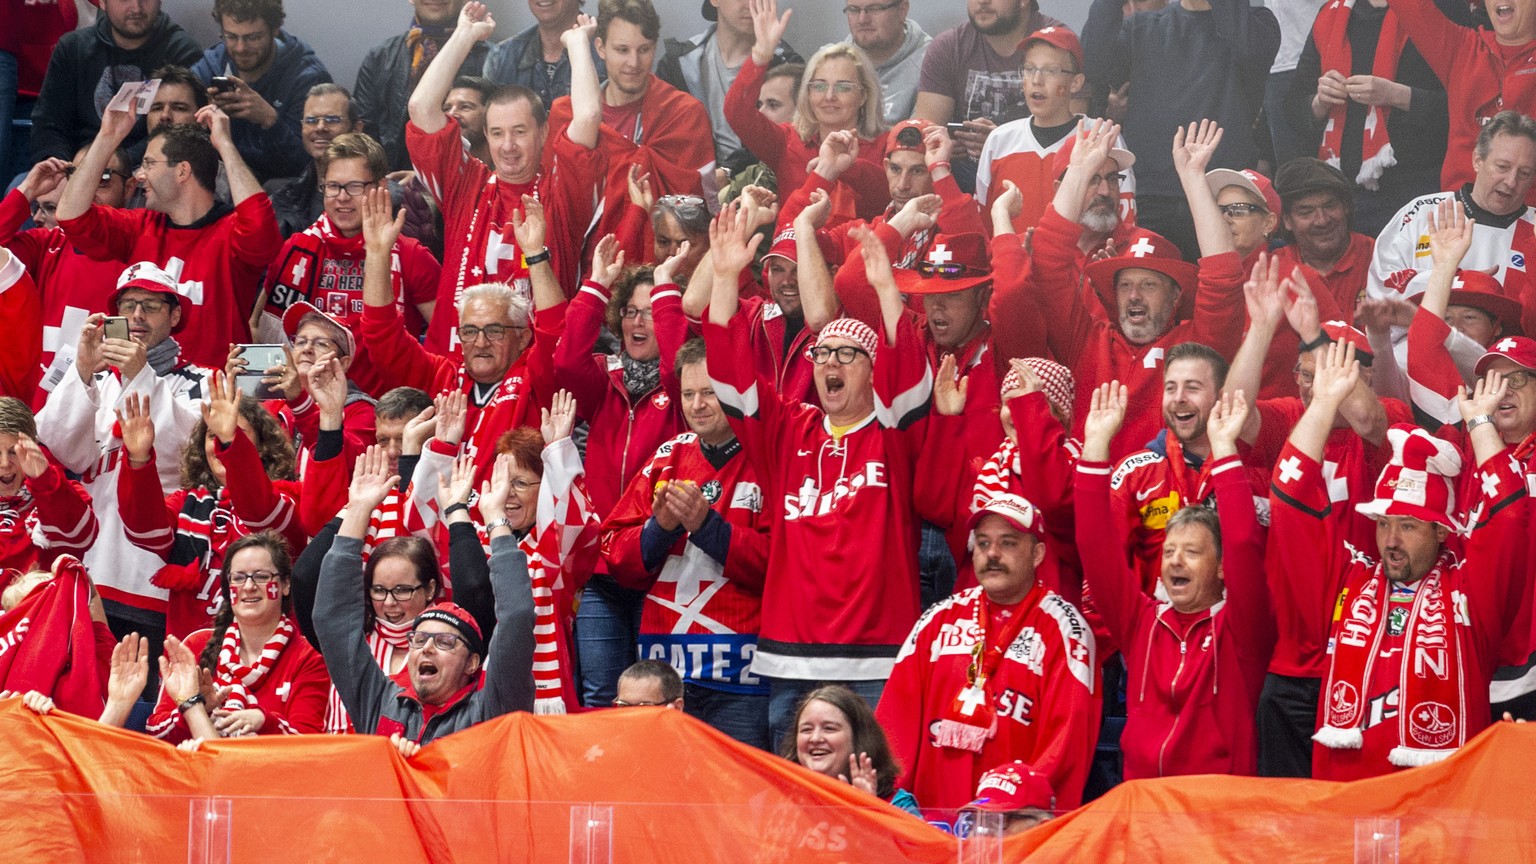 Swiss fans during the game between Switzerland and Italy, at the IIHF 2019 World Ice Hockey Championships, at the Ondrej Nepela Arena in Bratislava, Slovakia, on Saturday, May 11, 2019. (KEYSTONE/Mela ...